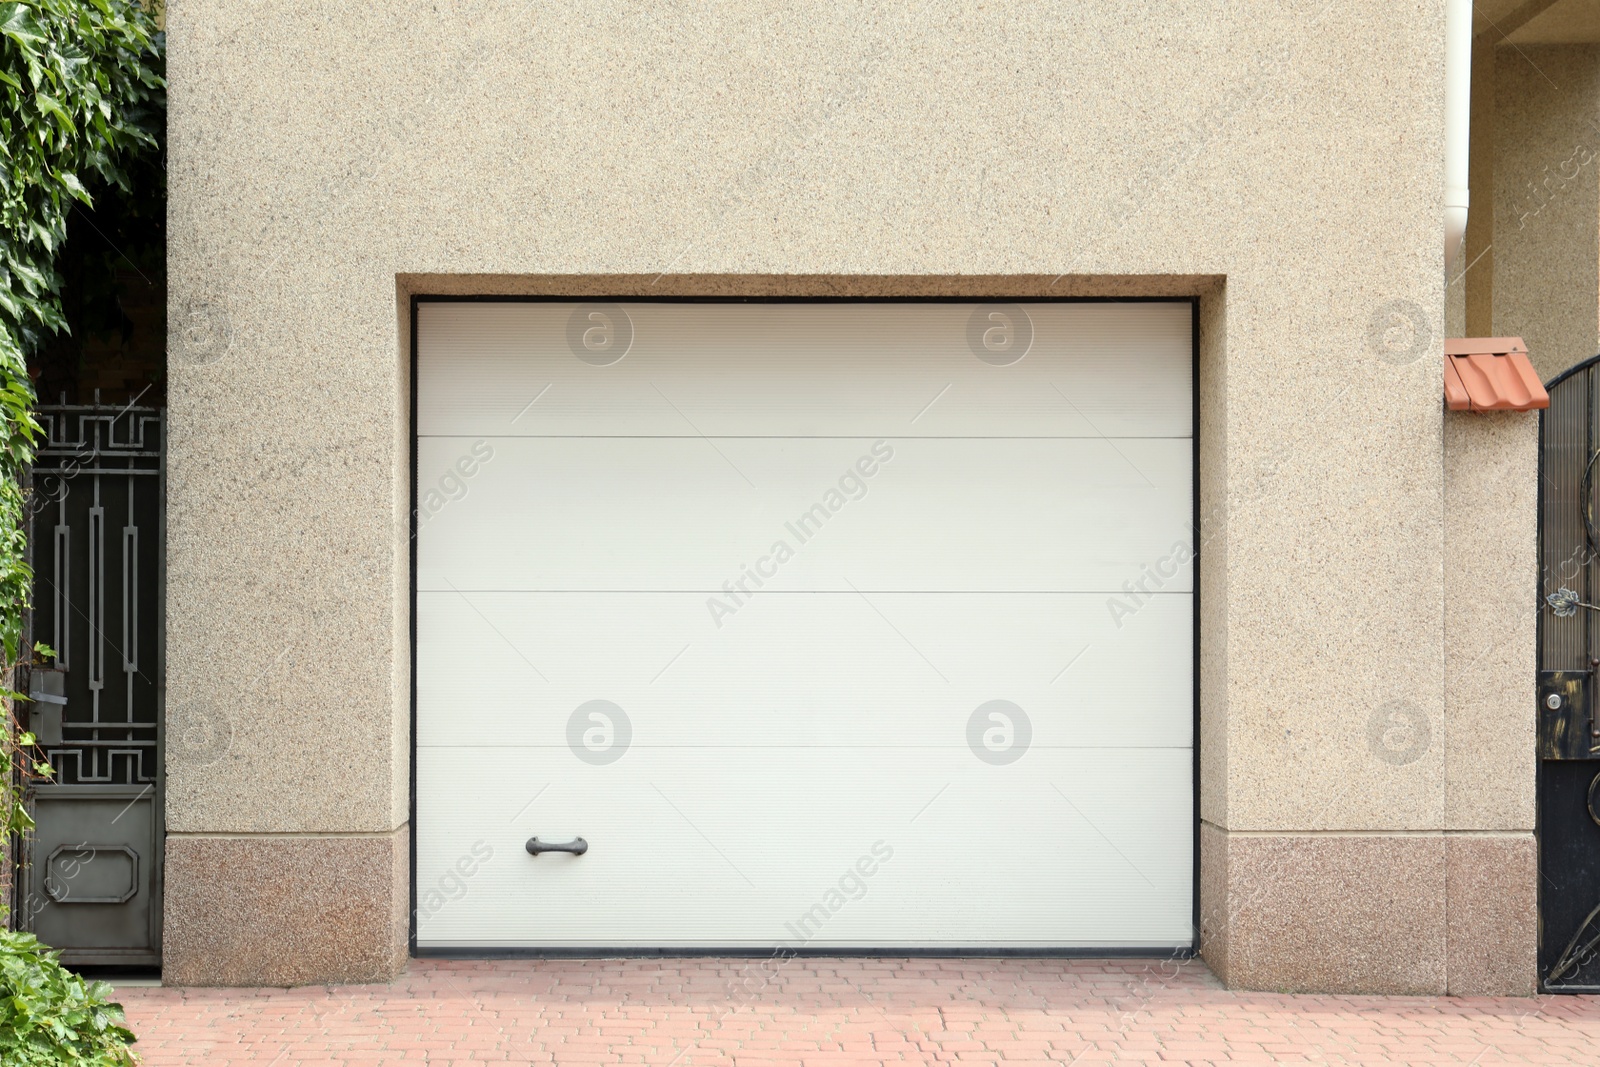 Photo of Building with white sectional garage door near entrance